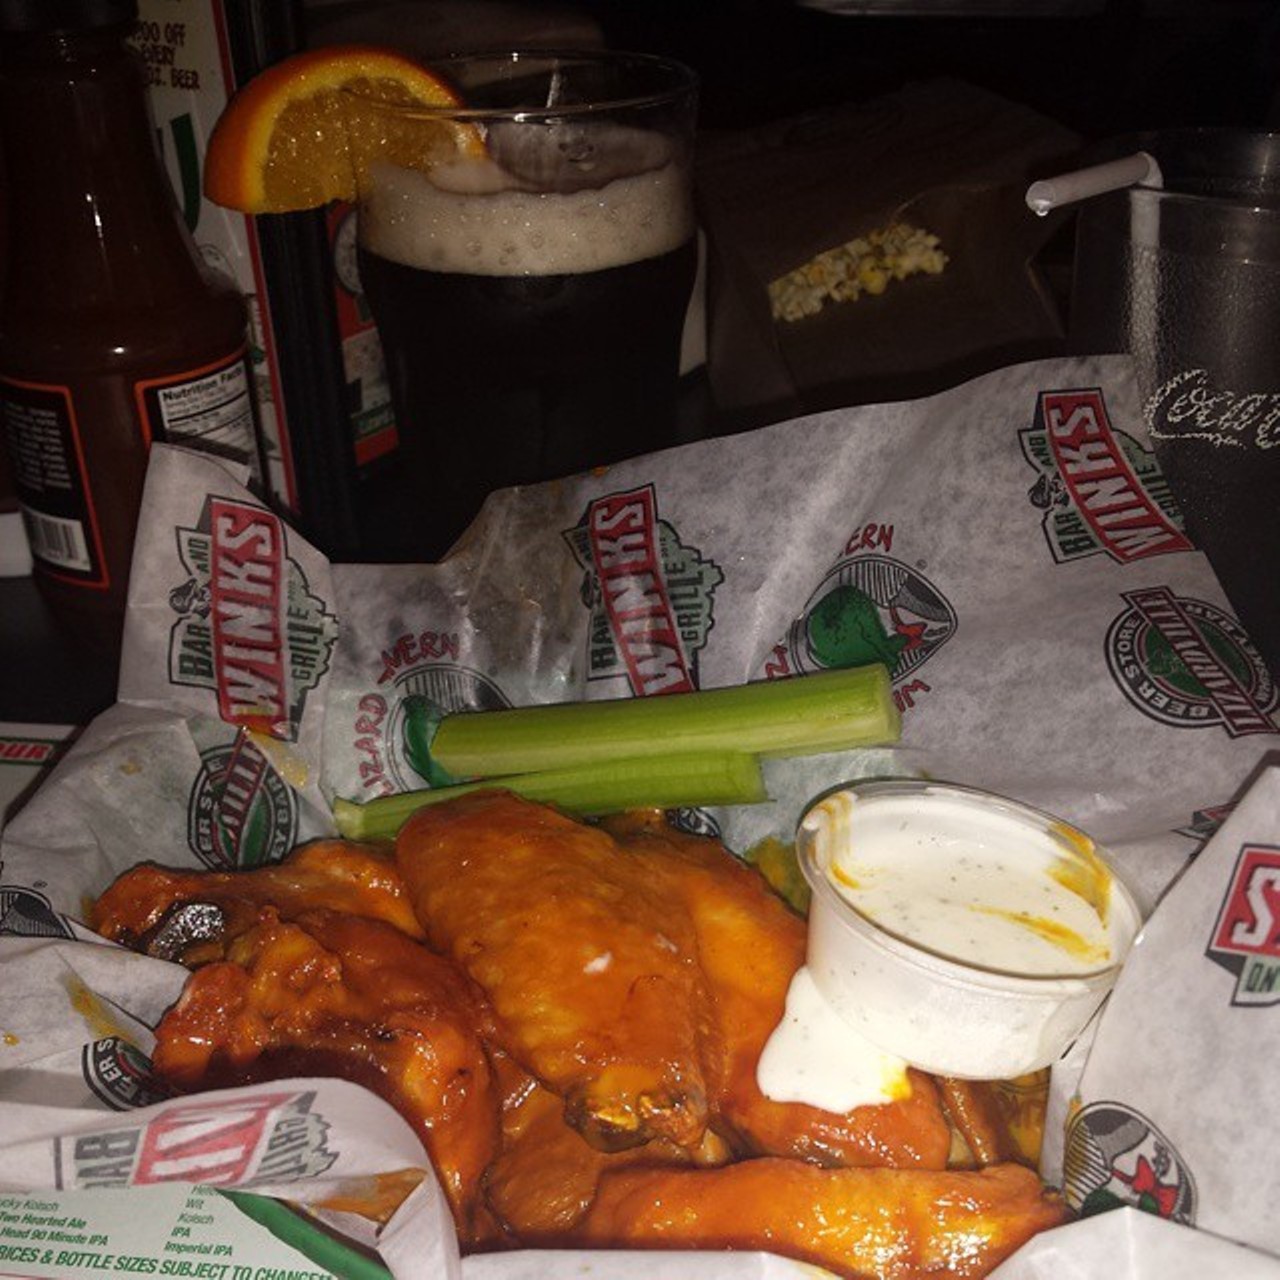 Winking Lizard - This local chain offers up dozen of delicious wing options, from Sweet 'n Sour to their extra hot Fire in the Hole wings. Give them all a try at one of Winking's northeast Ohio locations. Photo via Tracy, Instagram)